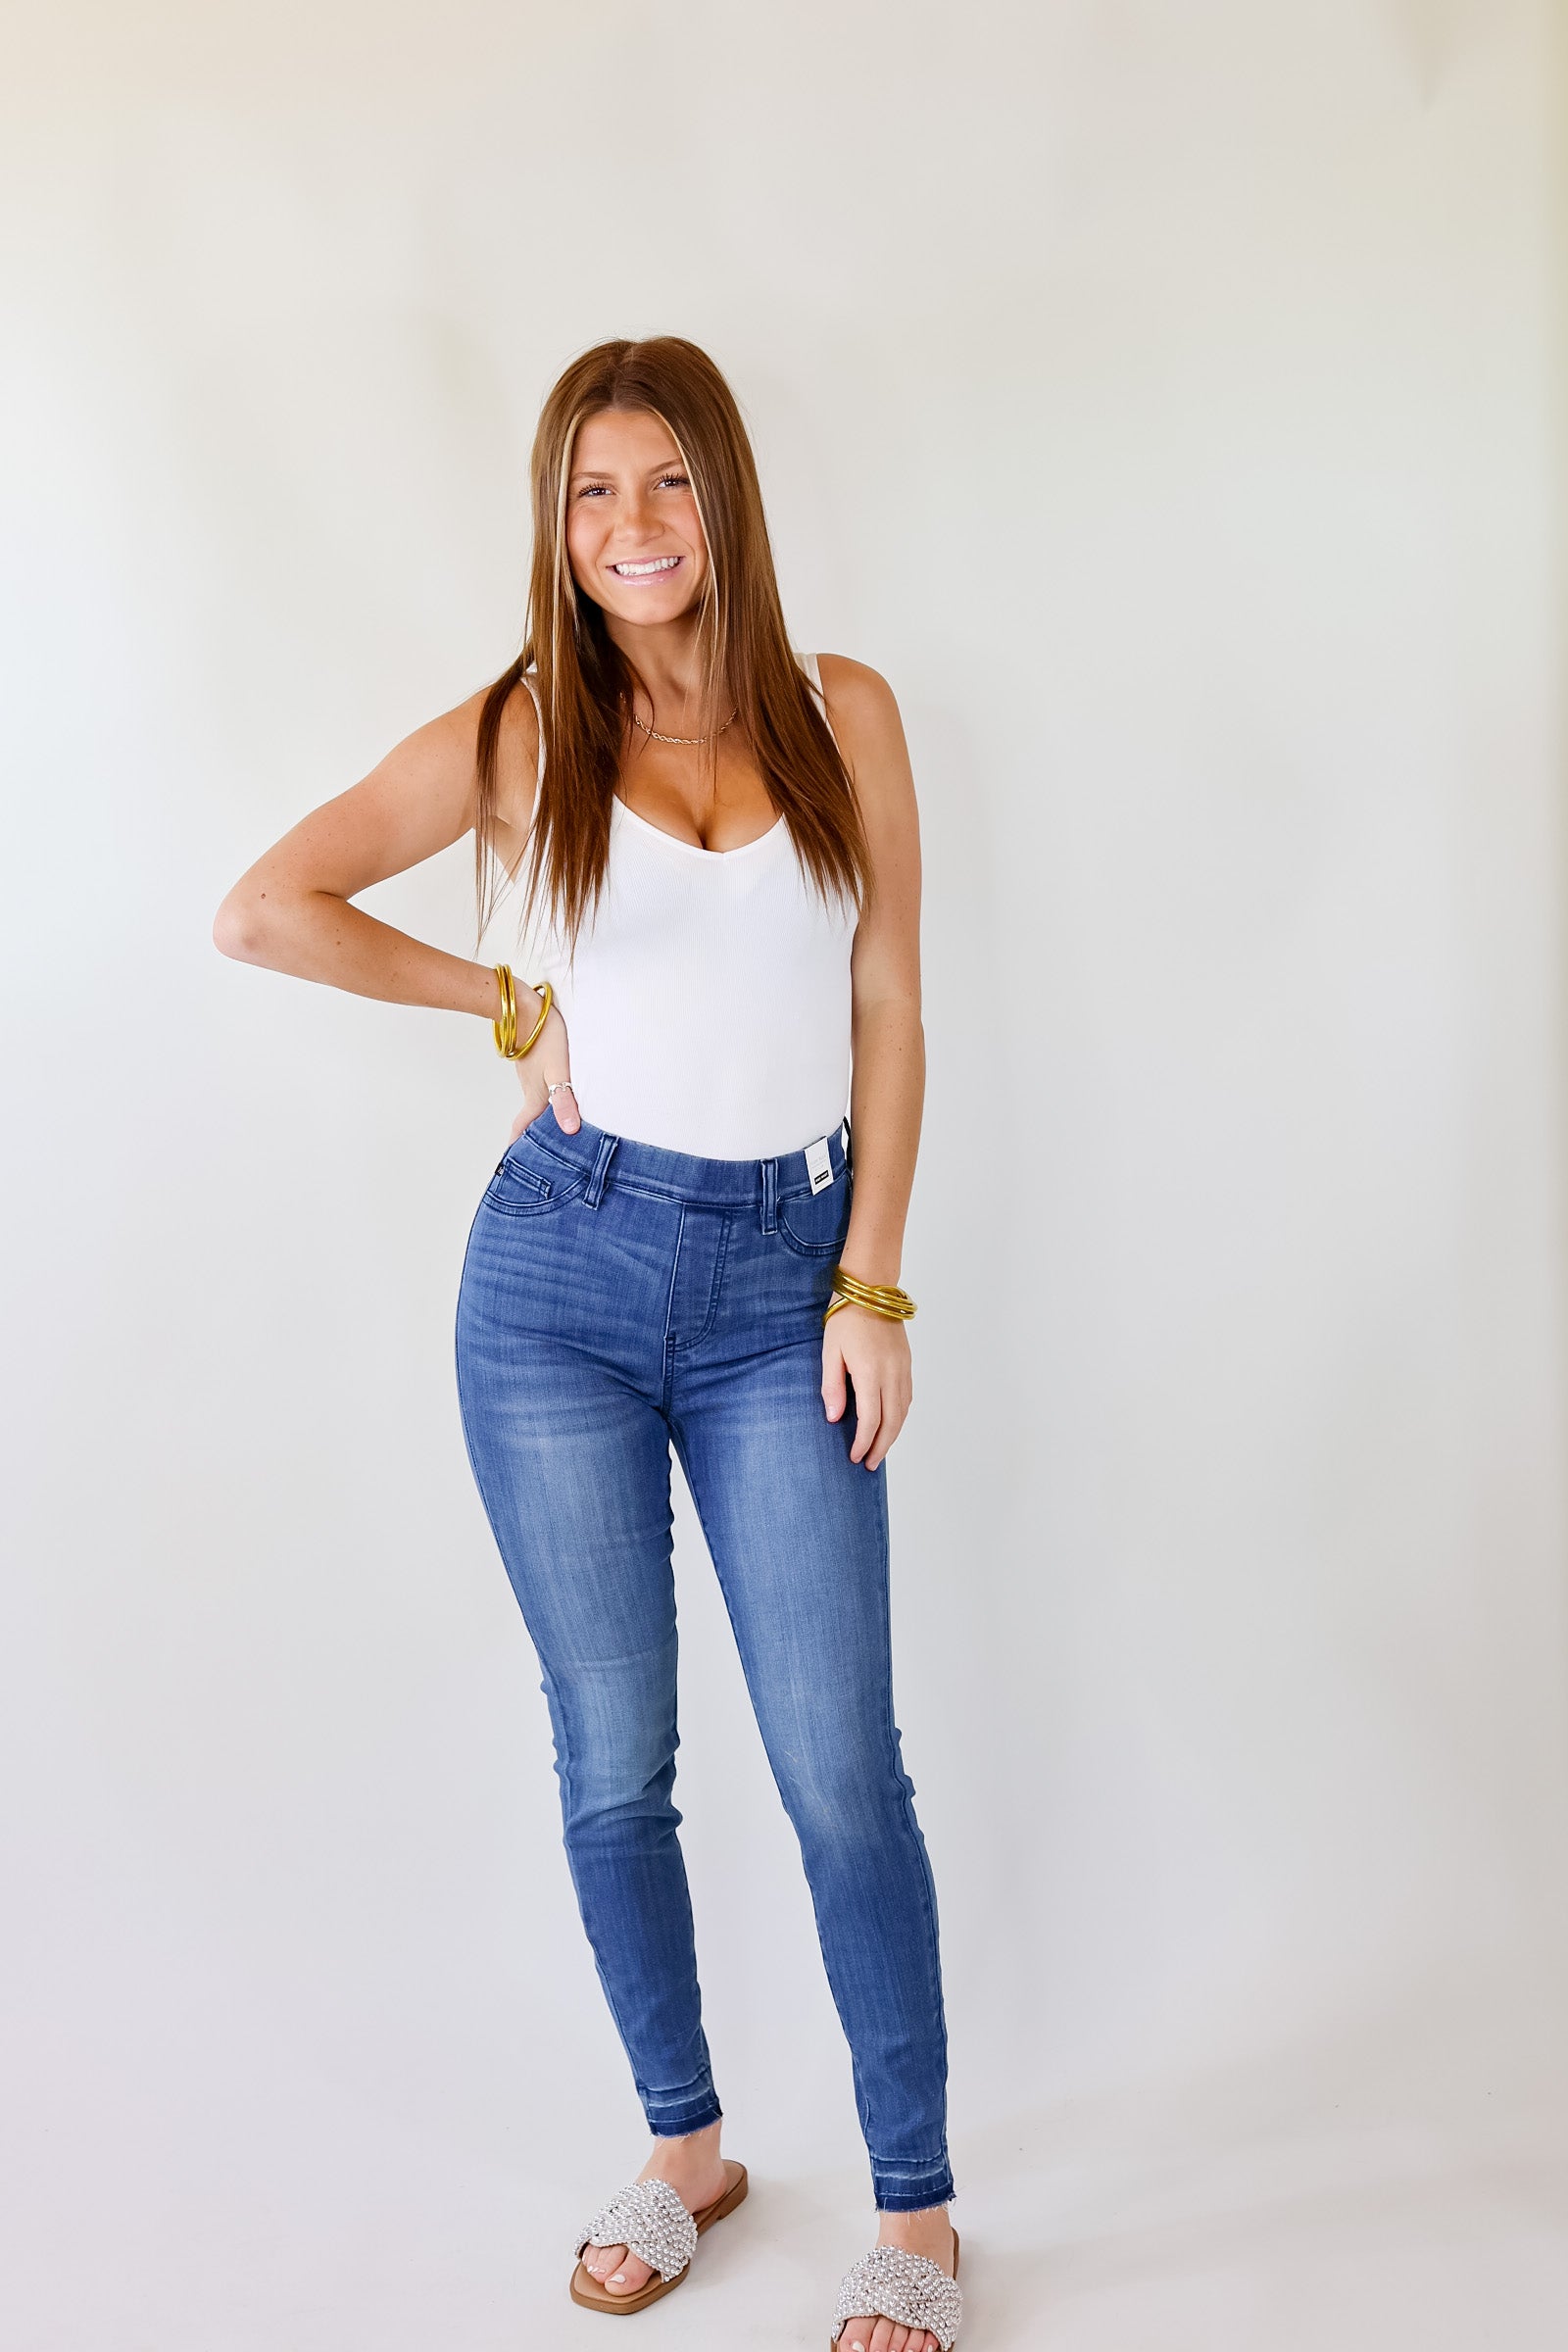 Judy Blue | Free To Dream Elastic Waist Pull On Skinny Jeans with Release Hem in Medium Wash - Giddy Up Glamour Boutique